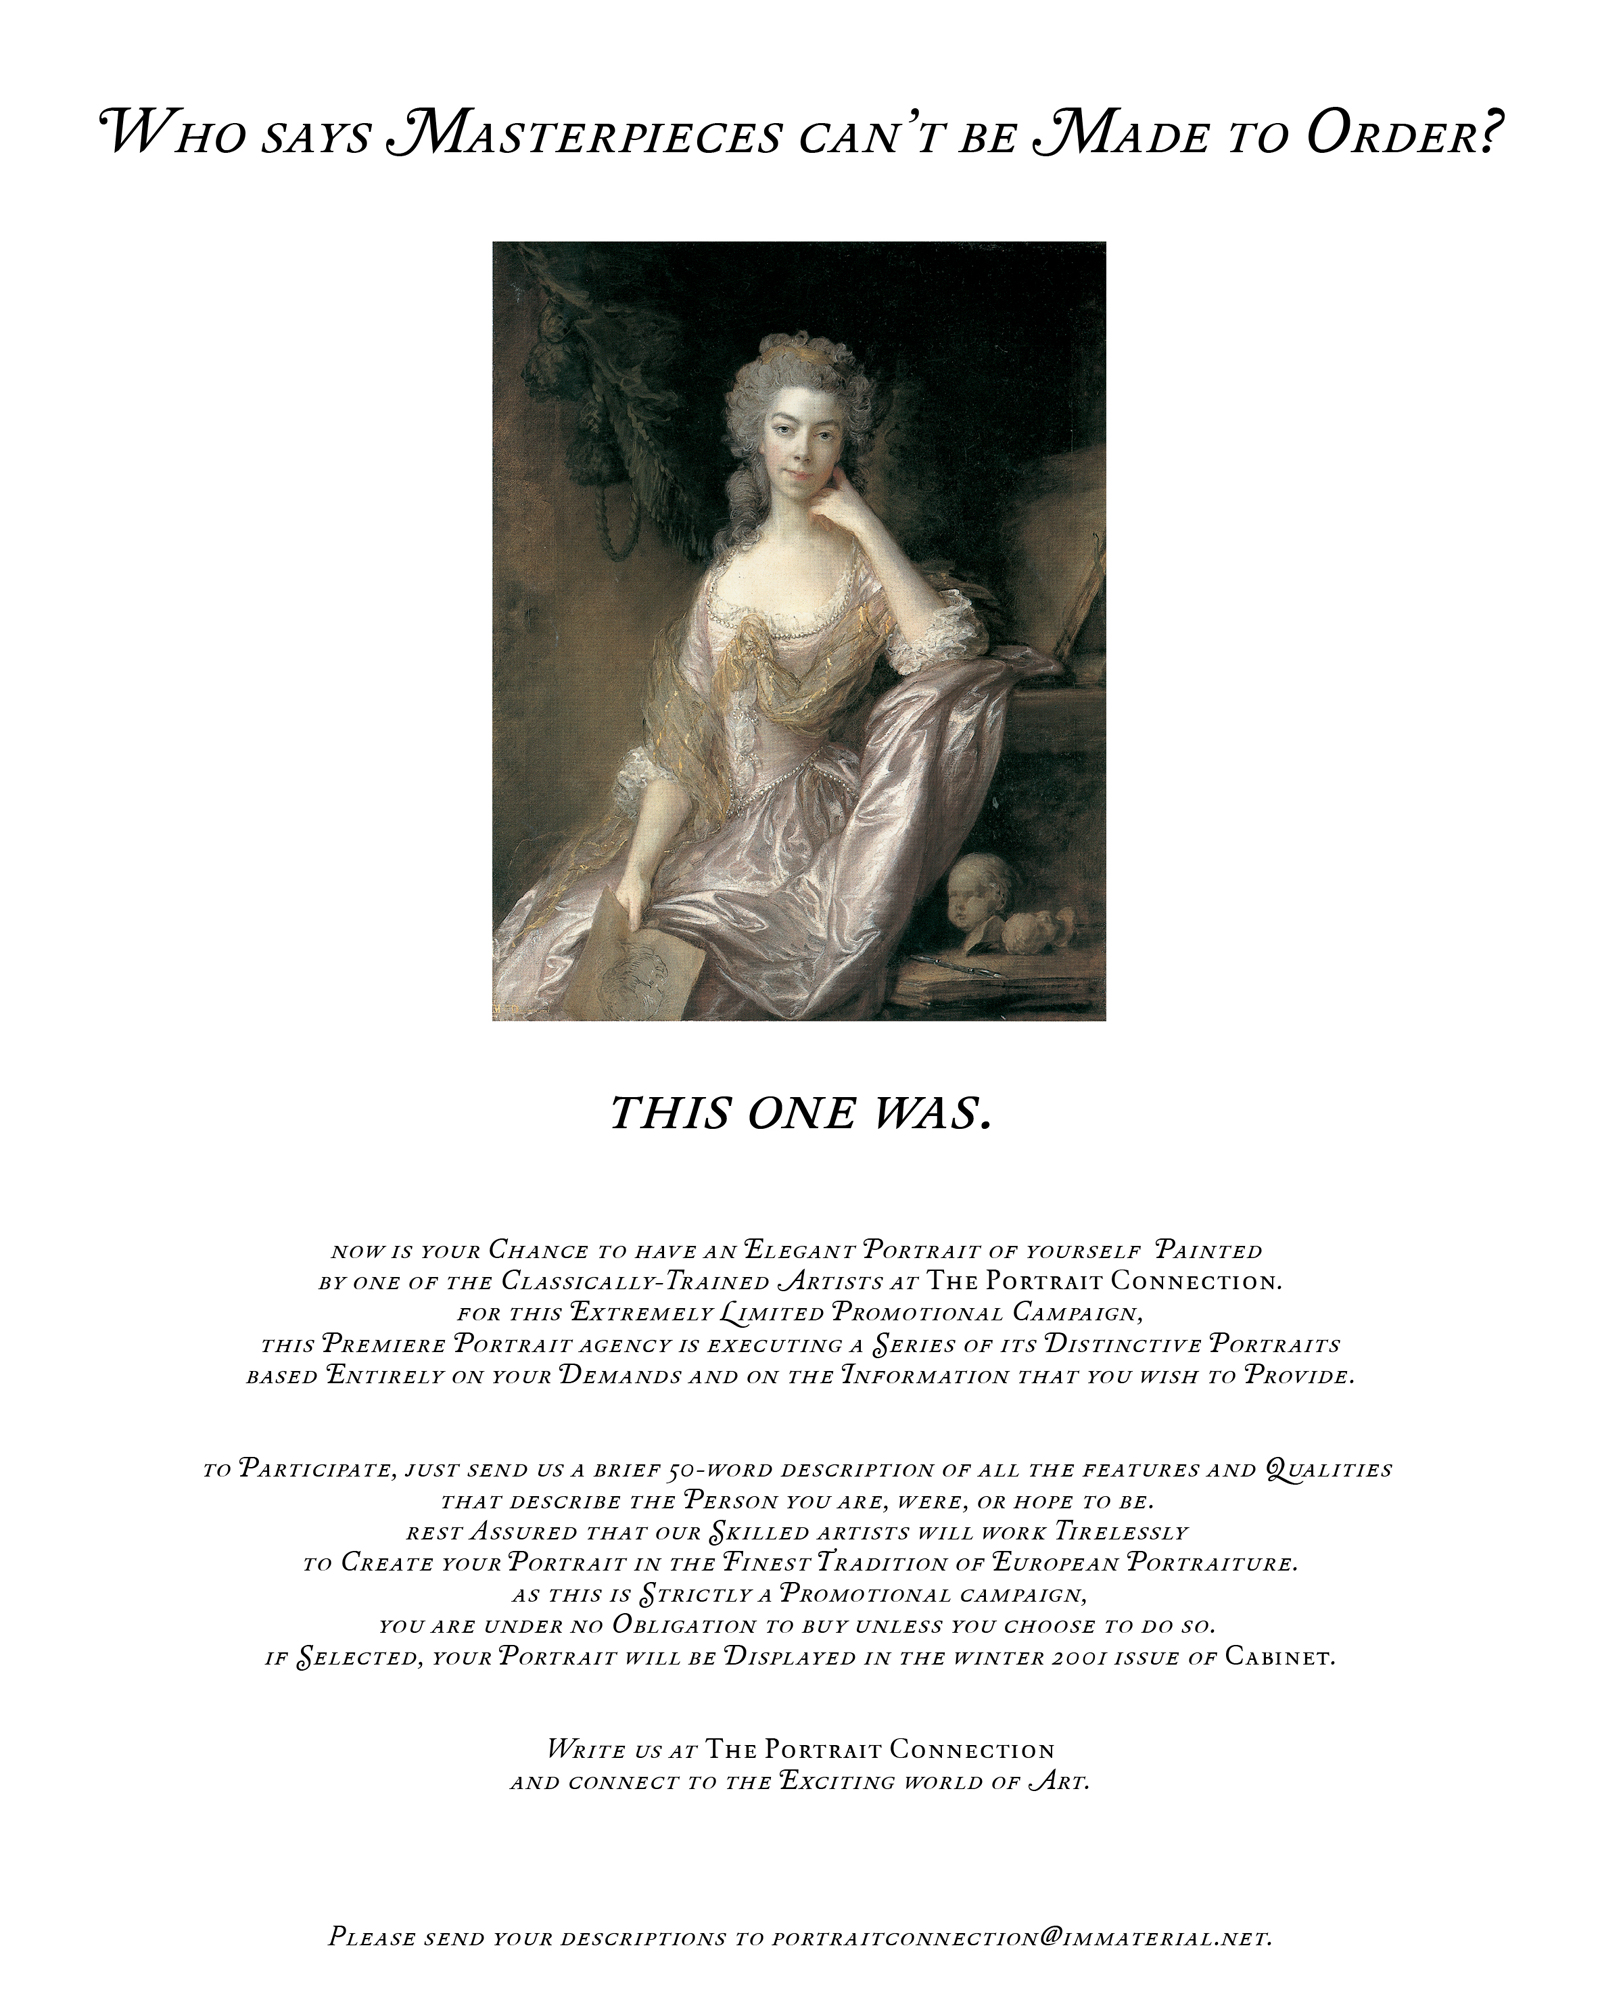 An unusual advertisement in which an eighteenth-century portrait of an aristocrat is accompanied by the following text: “Who says masterpieces can’t be made to order? This one was. Now is your chance to have an elegant portrait of yourself painted by one of the classically trained artists at the Portrait Connection. For this extremely limited promotional campaign, this premiere portrait agency is executing a series of its distinctive portraits based entirely on your demands and on the information that you wish to provide. To participate, just send us a brief 50-word description of all the features and qualities that describe the person you are, were, or hope to be. Rest assured that our skilled artists will work tirelessly to create your portrait in the finest tradition of European portraiture. As this is strictly a promotional campaign, you are under no obligation to buy unless you choose to do so. If selected, your portrait will be displayed in the winter 2001 issue of Cabinet. Write us at the portrait connection and connect to the exciting world of art. Please send your descriptions to portraitconnection@immaterial.net.” Cabinet received many submissions in response. Portraits of those who were selected appeared in Cabinet issue number 5. They can be seen at https://cabinetmagazine.org/issues/5/rostovsky.php
